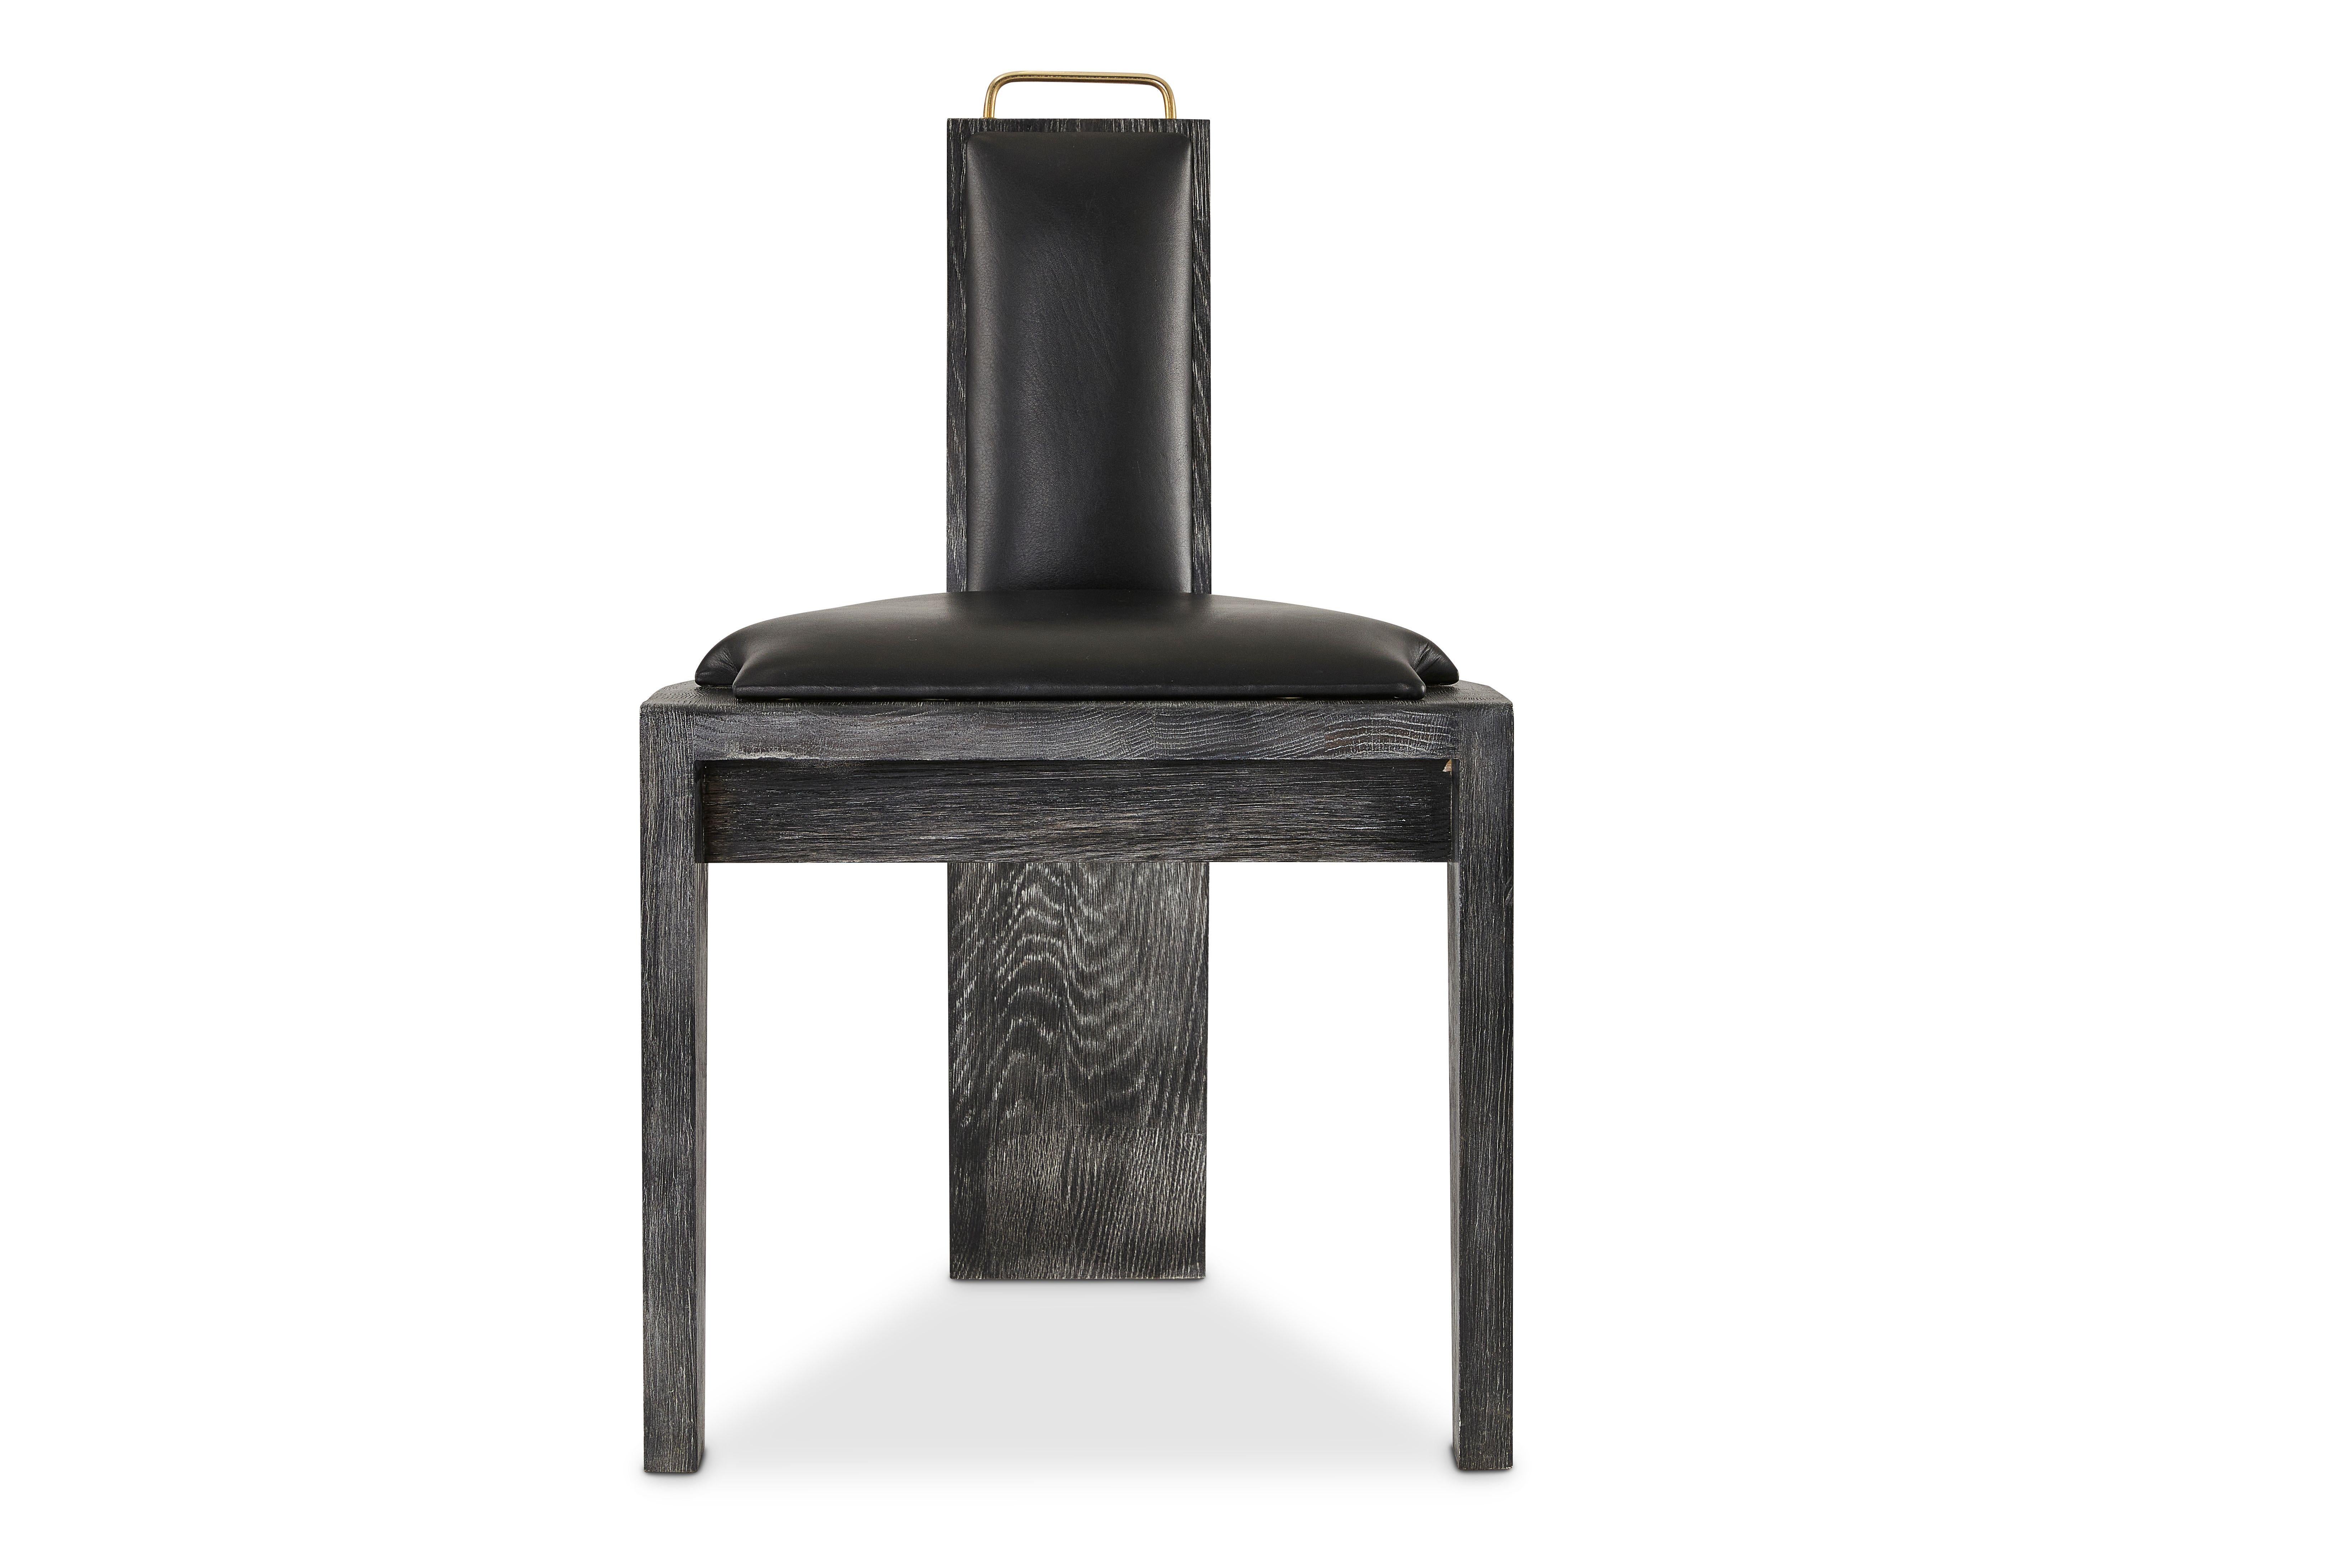 Olifant black dining chair by Egg Designs
Dimensions: 50 L x 53 D x 84 H
Materials: Ceramic, brass handle, black cerused oak, leather upholstery

Founded by South Africans and life partners, Greg and Roche Dry - Egg is a unique perspective in